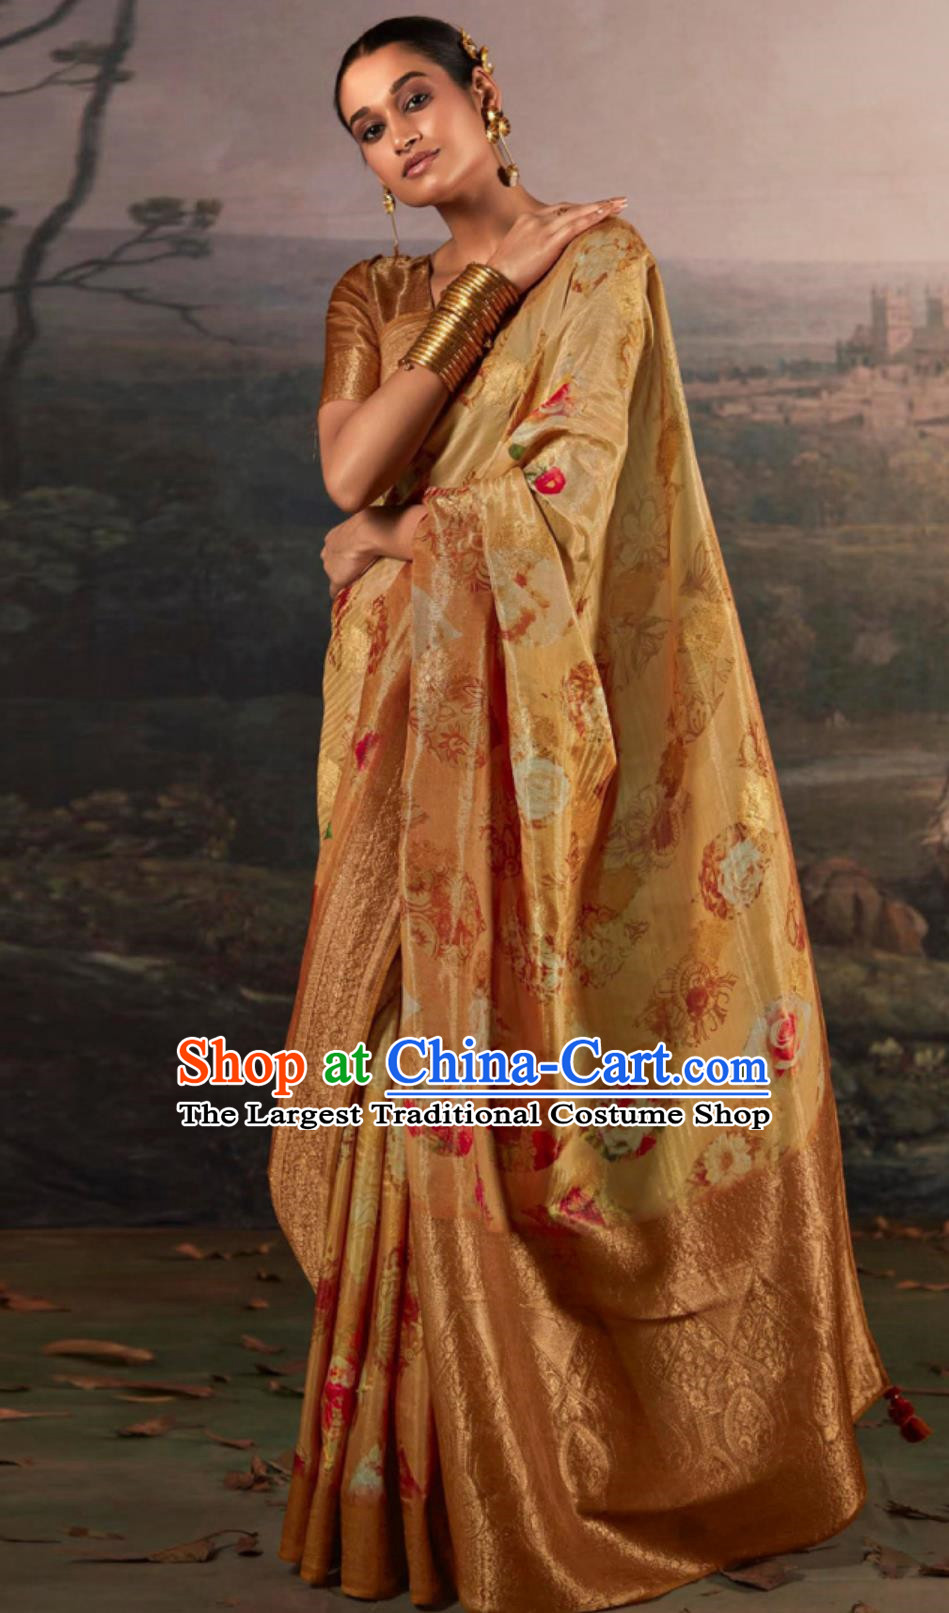 Ginger Indian Saree Features Traditional Silk Print Ethnic Wrap Skirt Sari For Ladies Daily Festive Wear